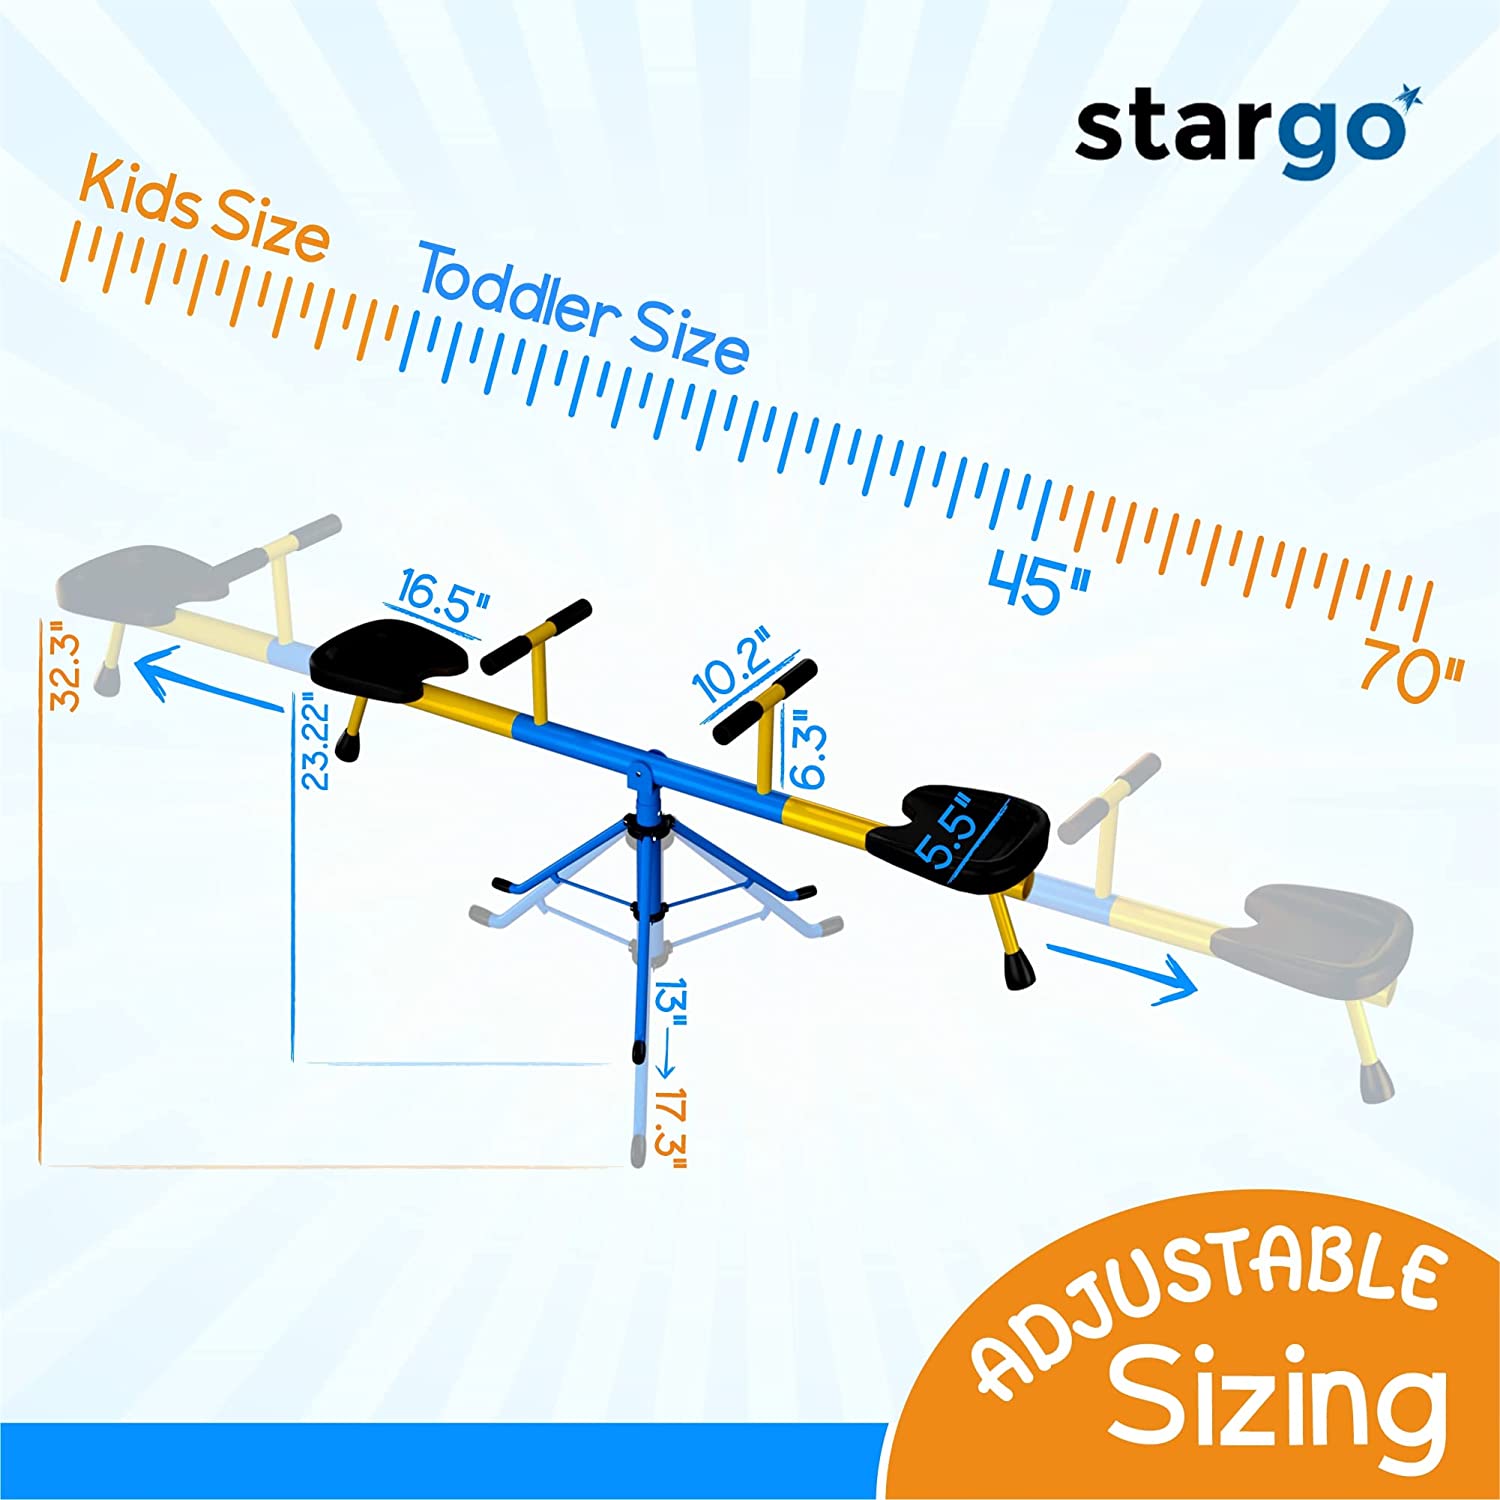 Stargo 360 Swivel Spinning Seesaw for Kids, Teeter Totter with Adjustable Frame Height 46-70”, Indoor or Outdoor Playground Equipment for Toddlers - image 4 of 9